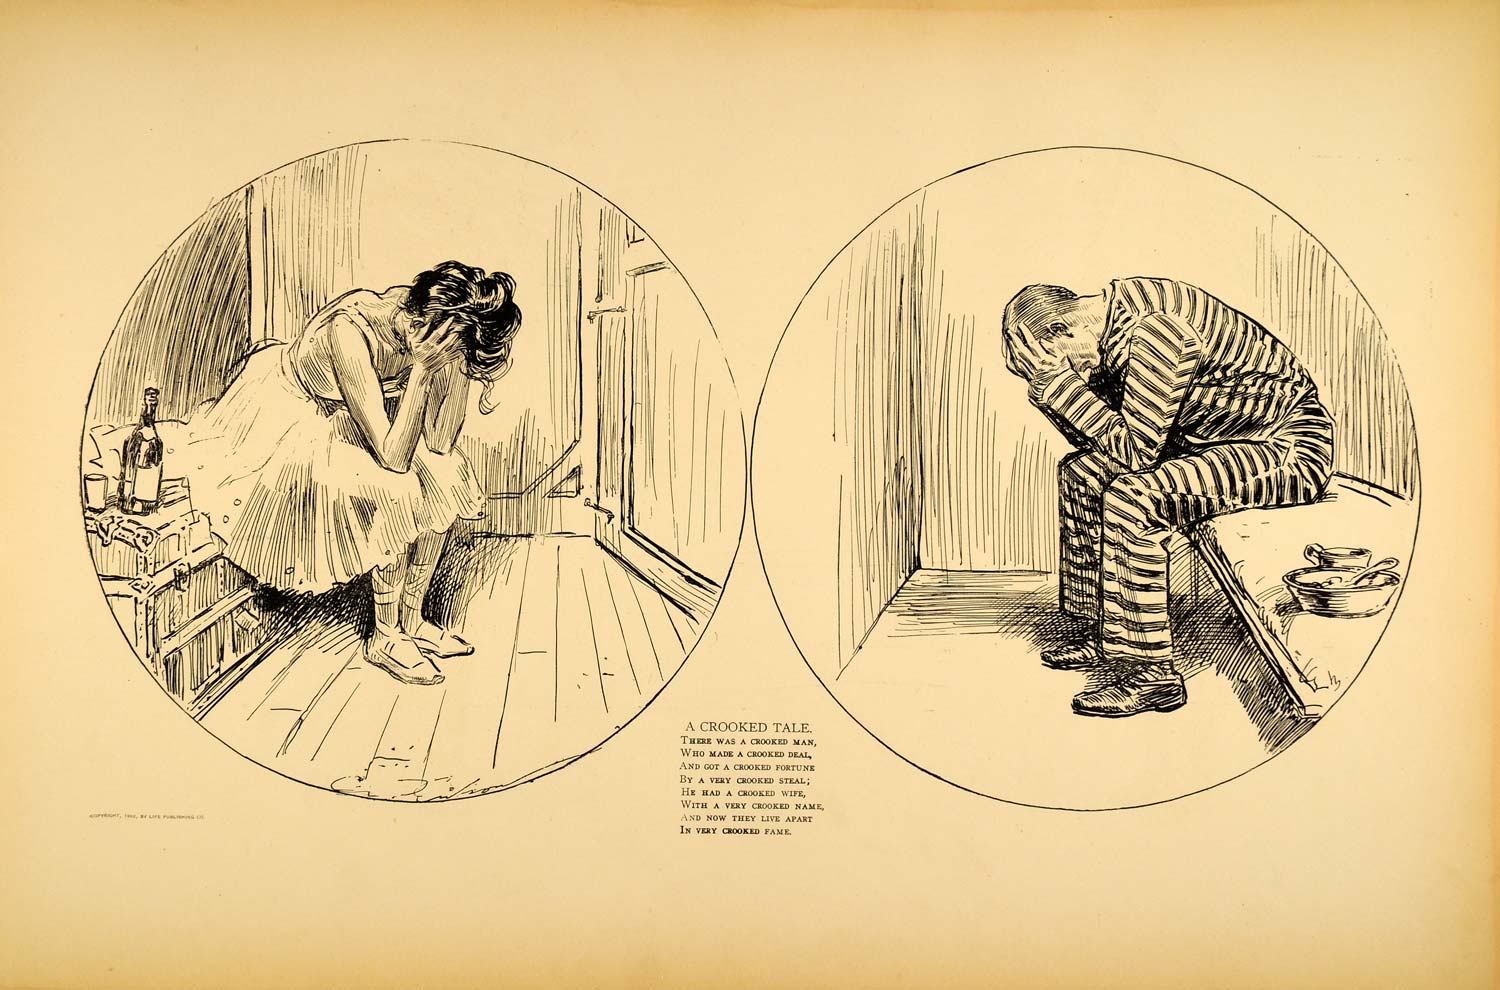 1906 Print Charles Dana Gibson Crooked Tale Jail Cell Prisoner Satire Drawing